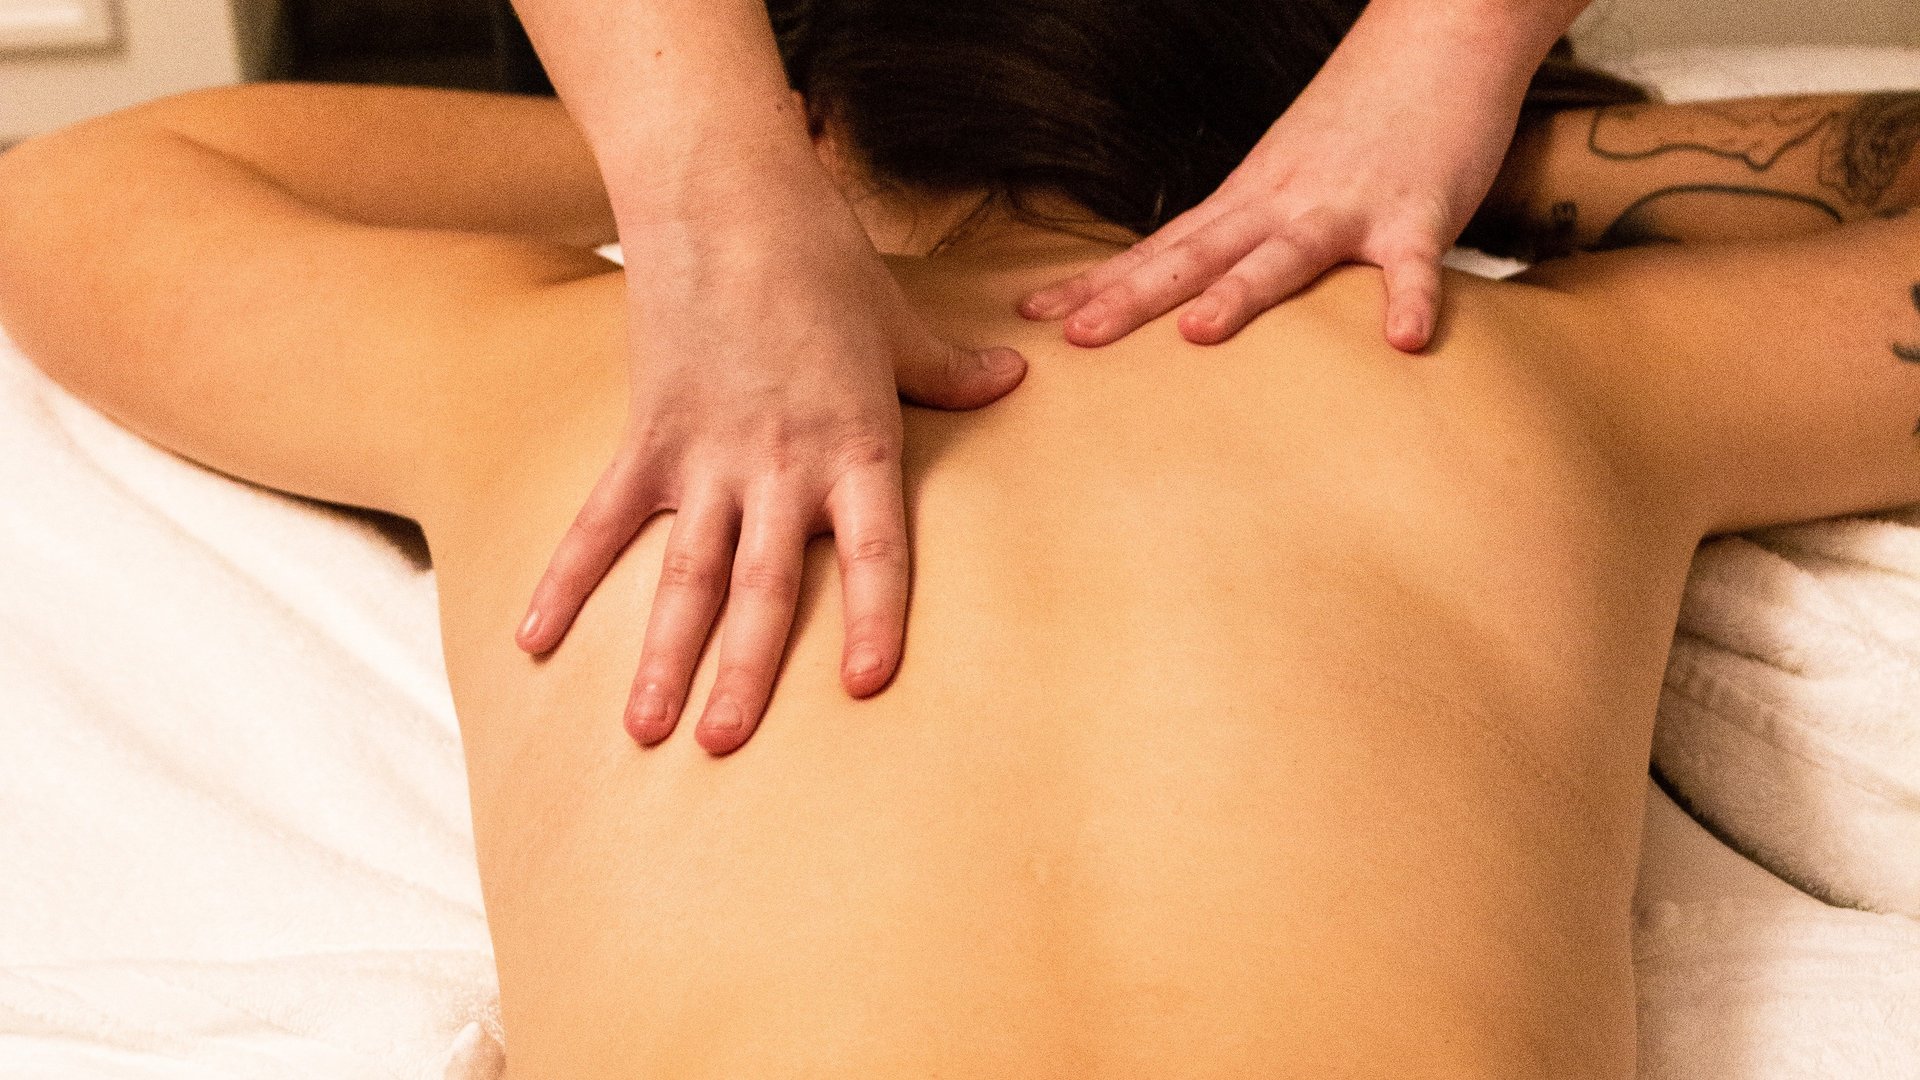 An acupressure massage for your well-being